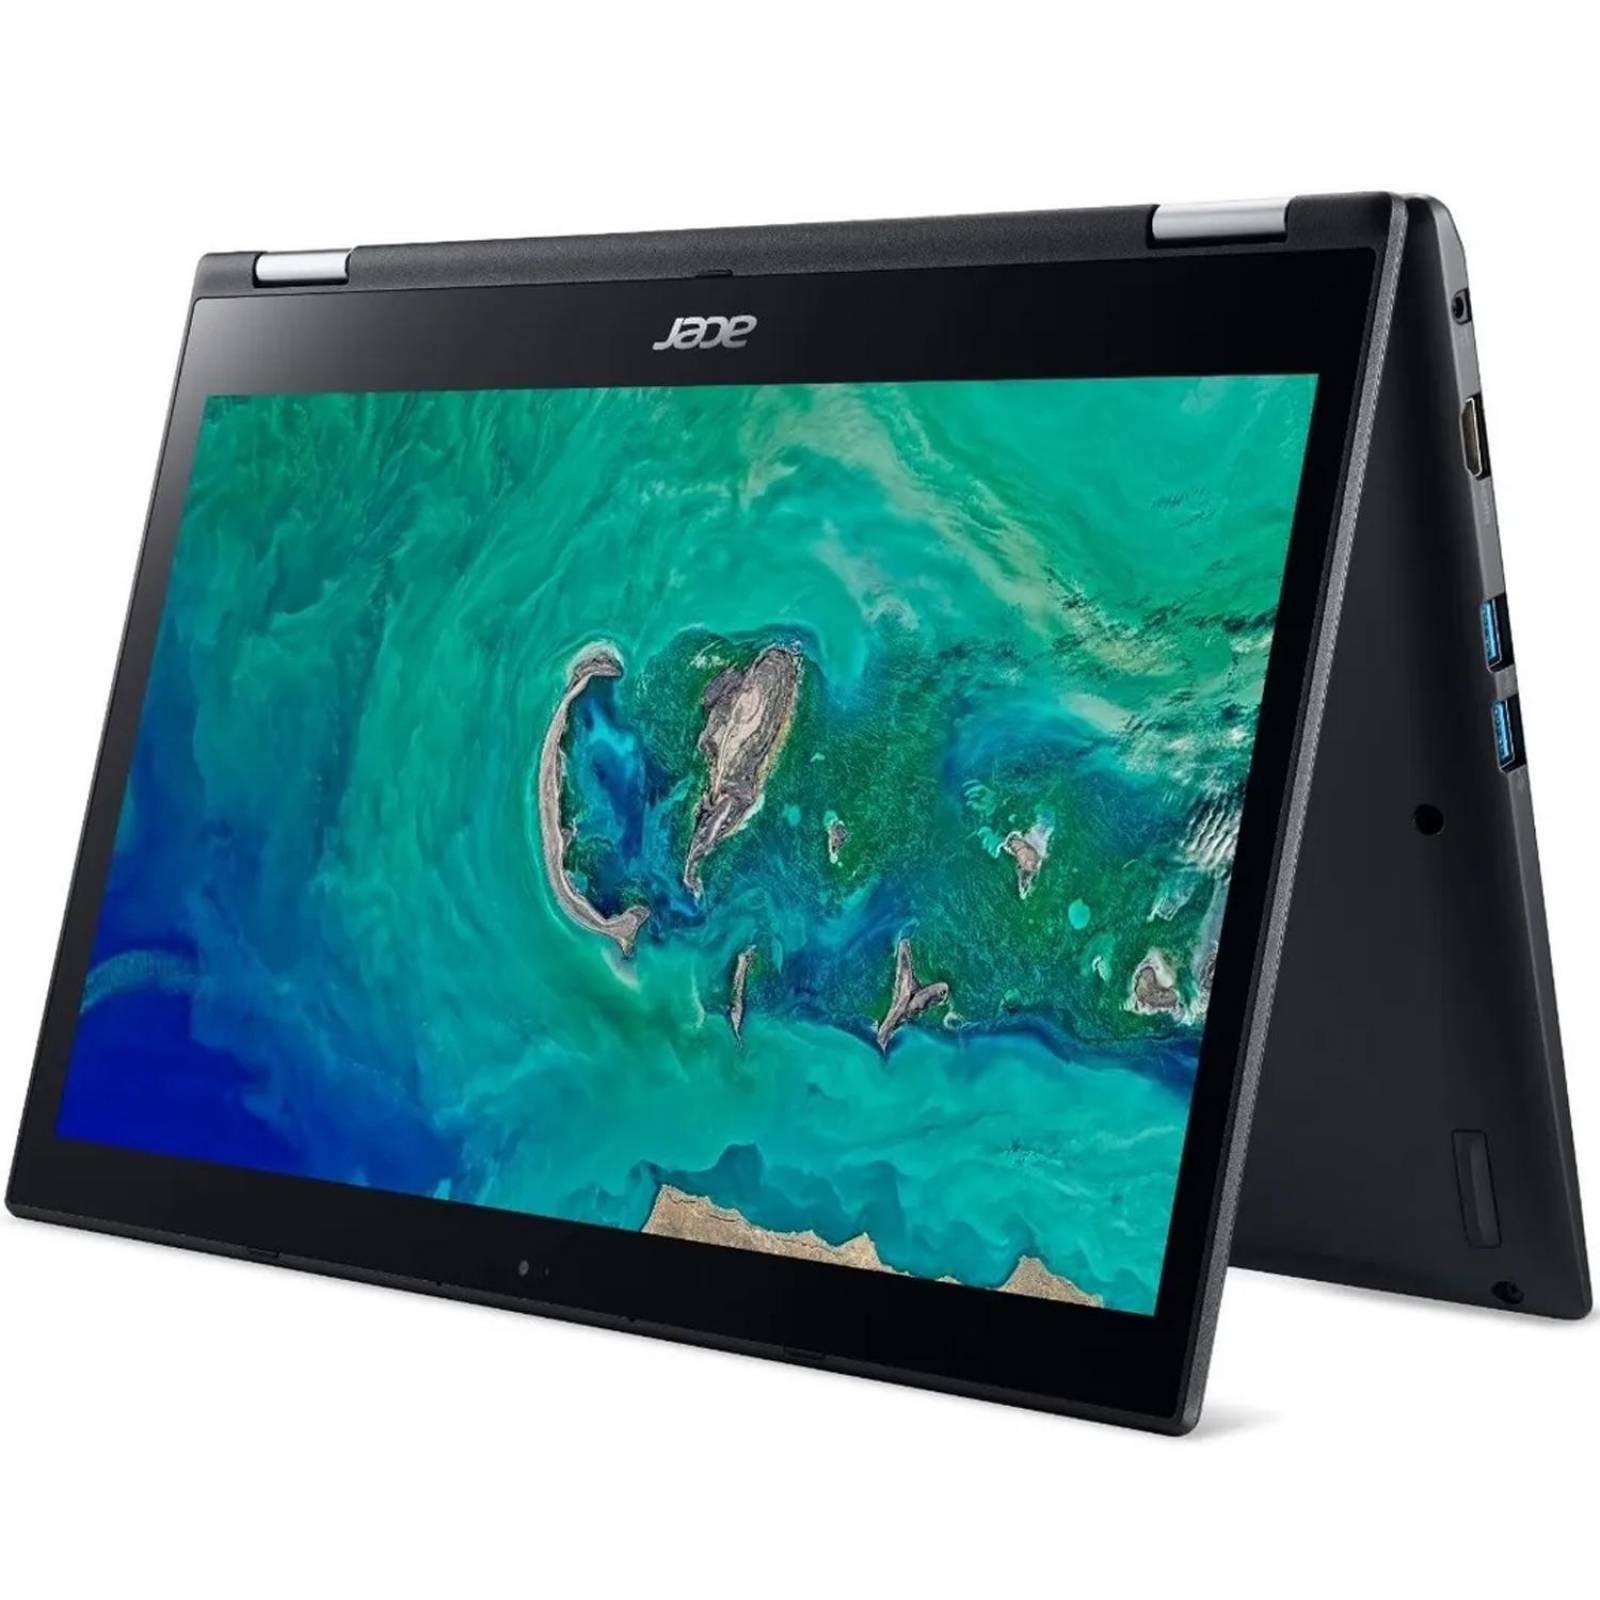 Laptop ACER SPIN 3 I3-8130U 4GB 1TB 14 Touch Win10 SP214-51-33WA 